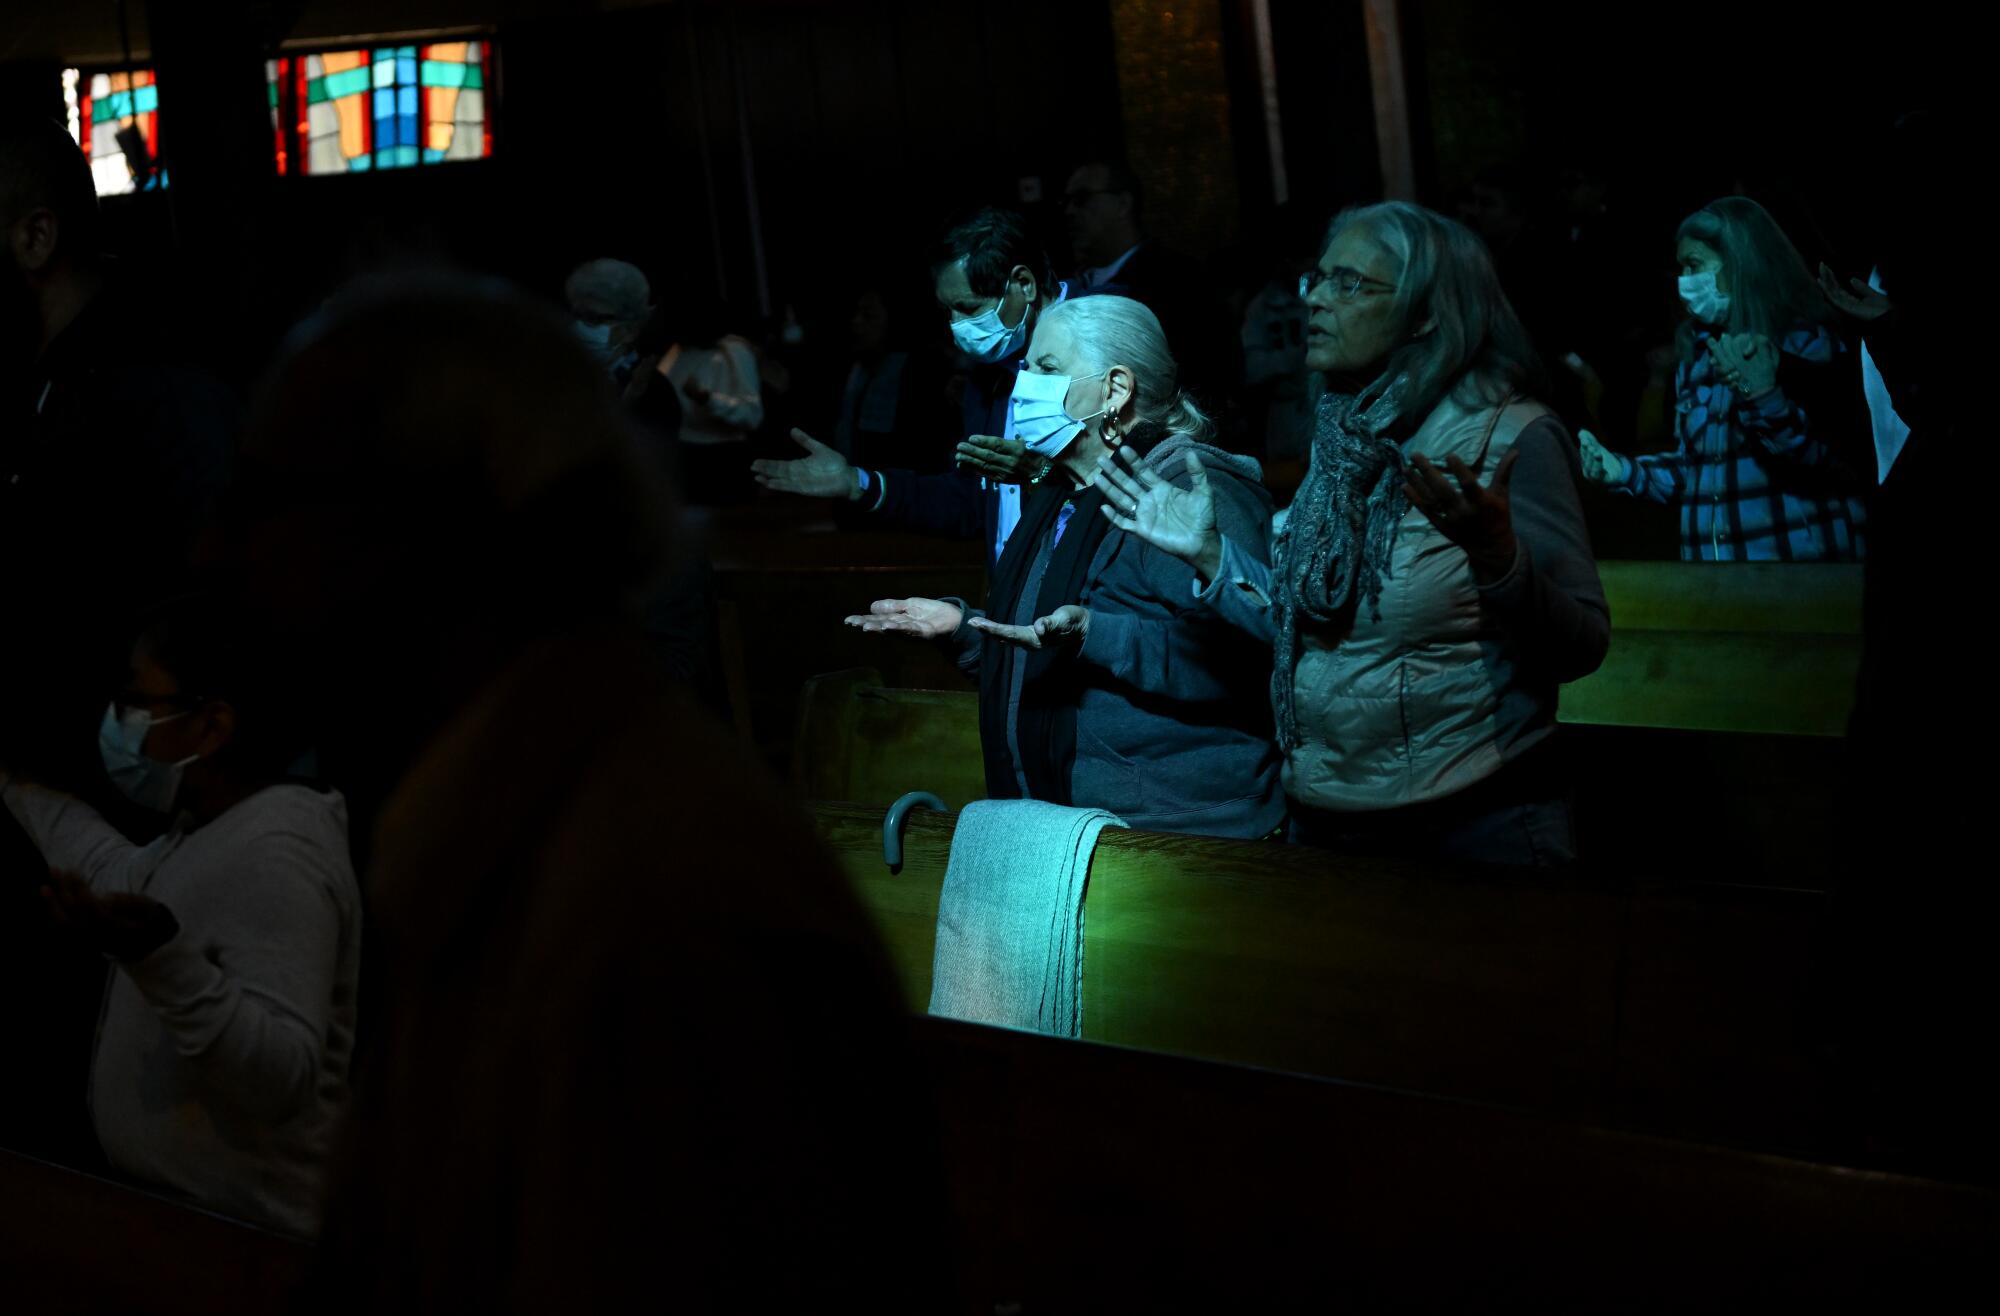 Standing in darkened pews, lit by blu-tinted light coming in through a stained-glass window, people pray during a mass